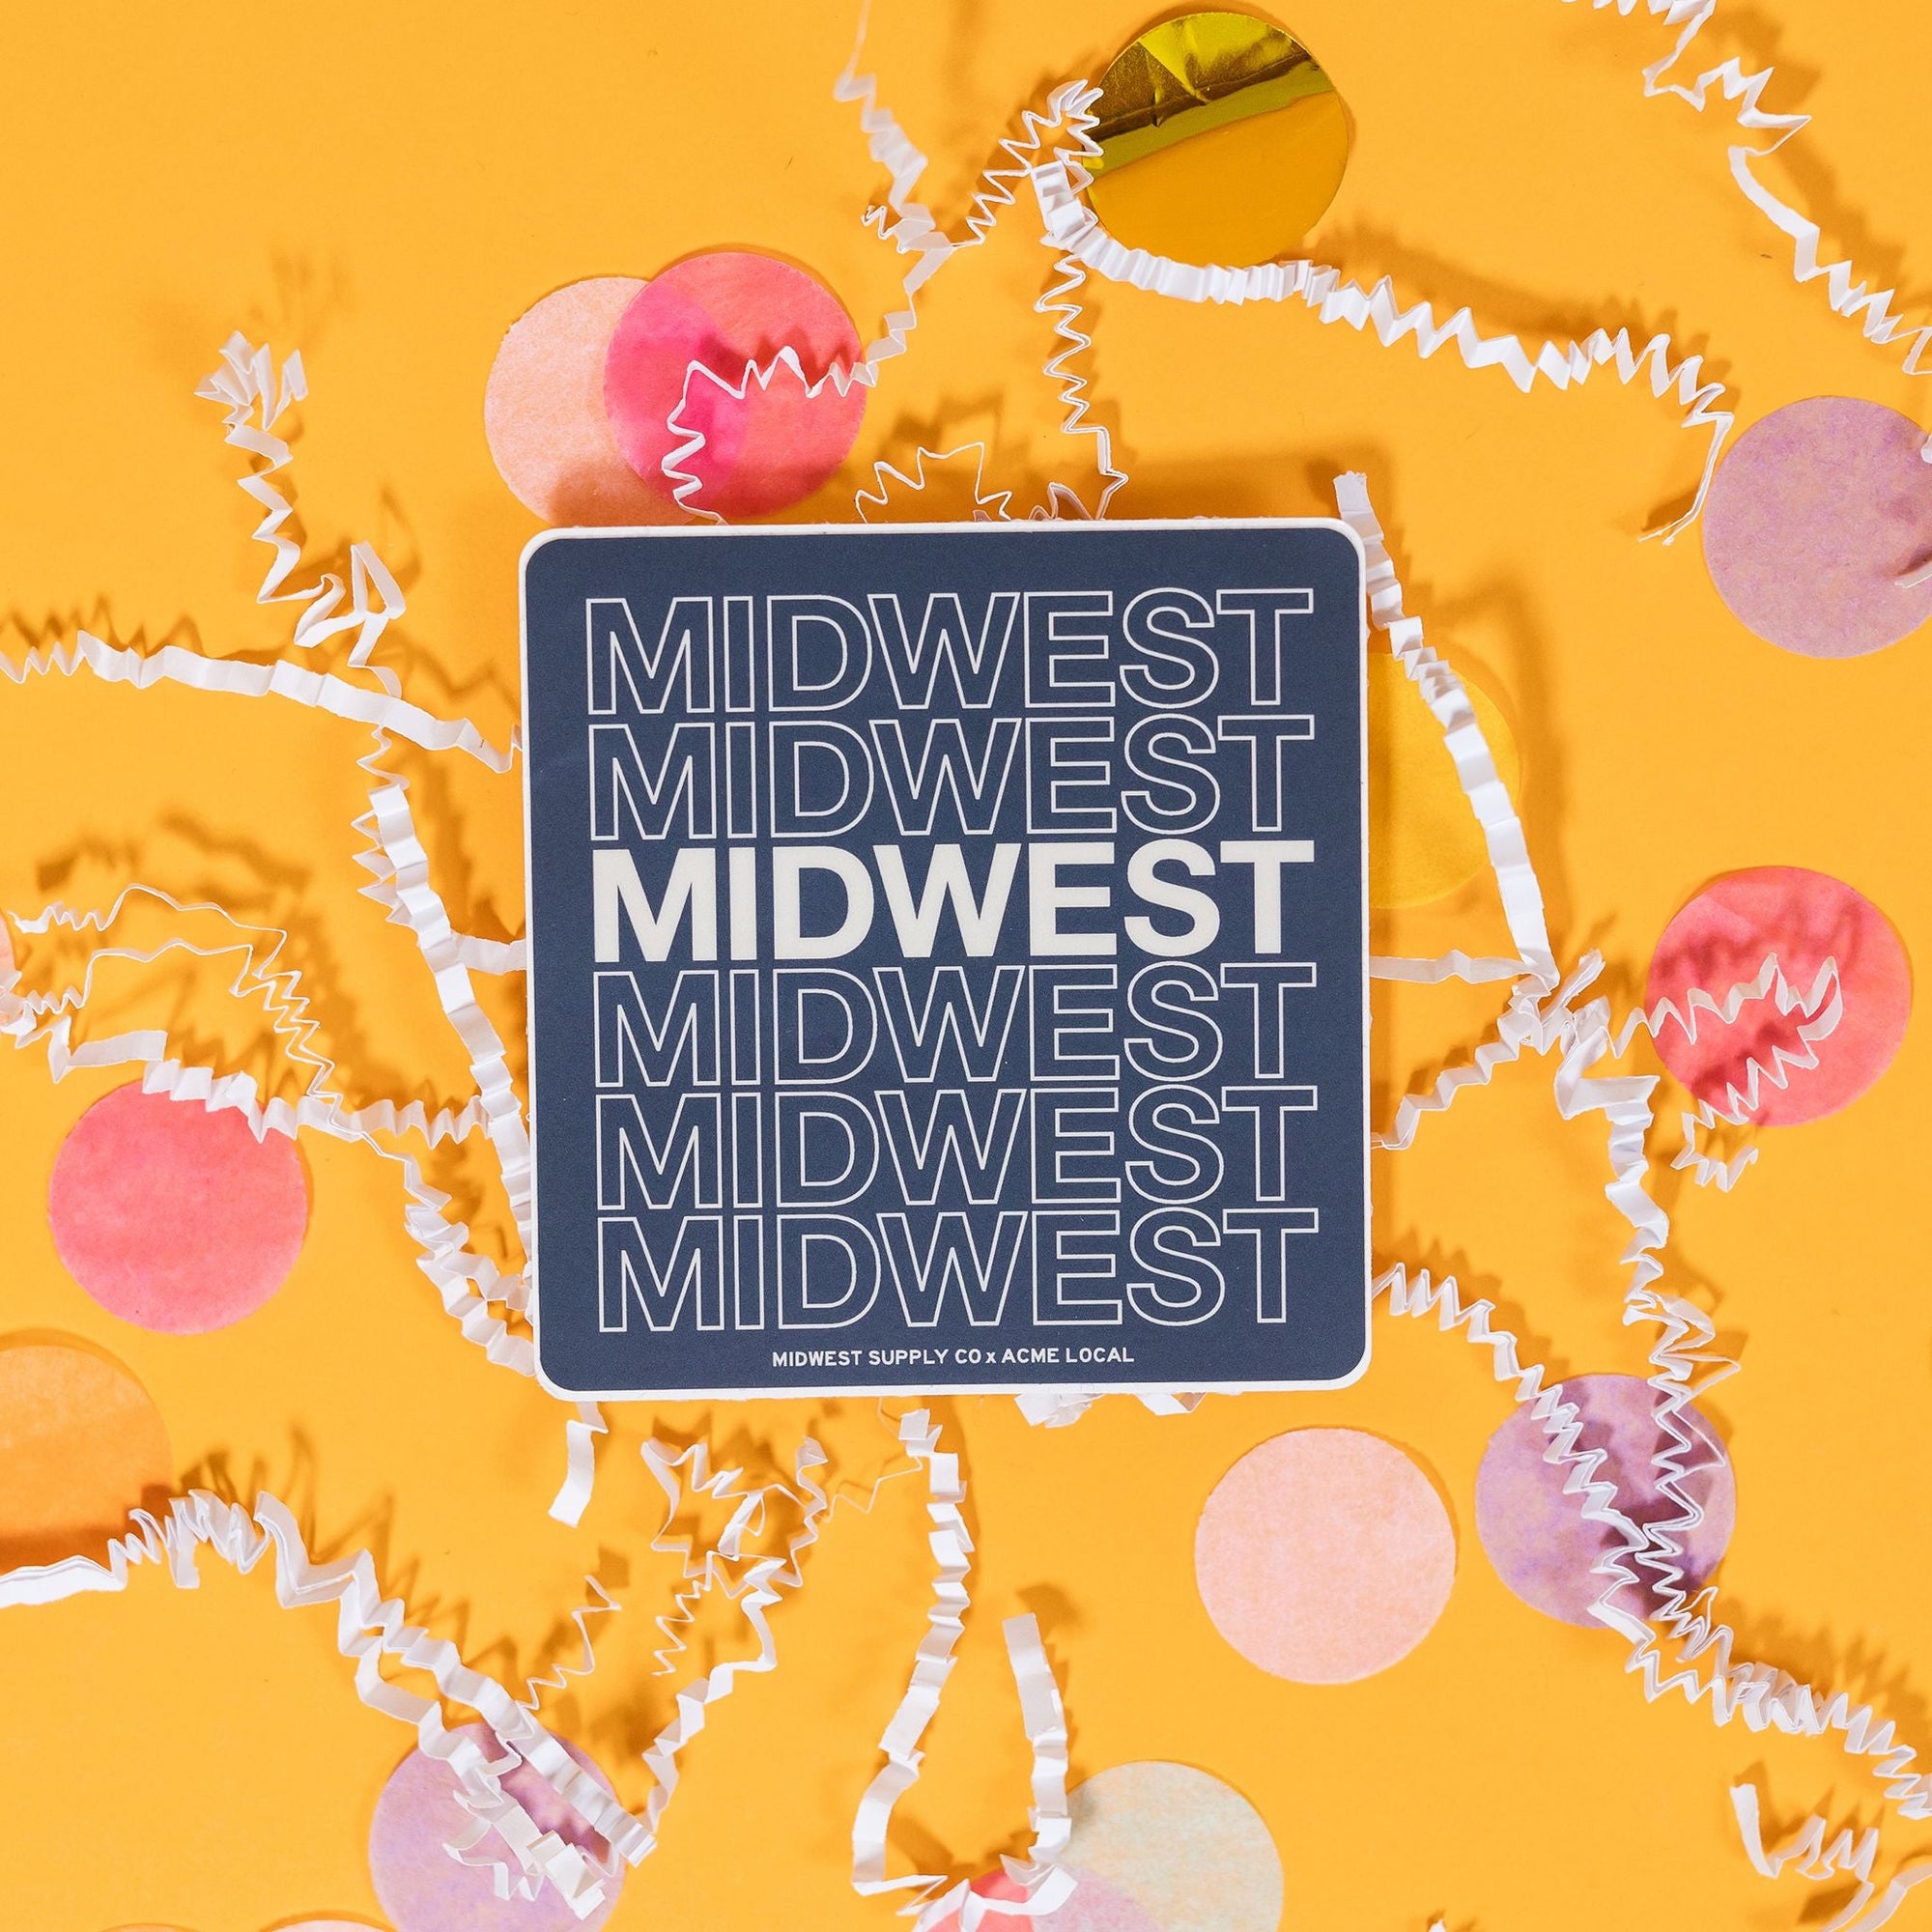 On a sunny mustard backgroudn sits a sticker with white crinkle and big, colorful confetti scattered around. This navy sticker says "MIDWEST MIDWEST MIDWEST MIDWEST MIDWEST MIDWEST" stacked in white block font. Five of the words are in white outline and one is in solid white. 2"-3"